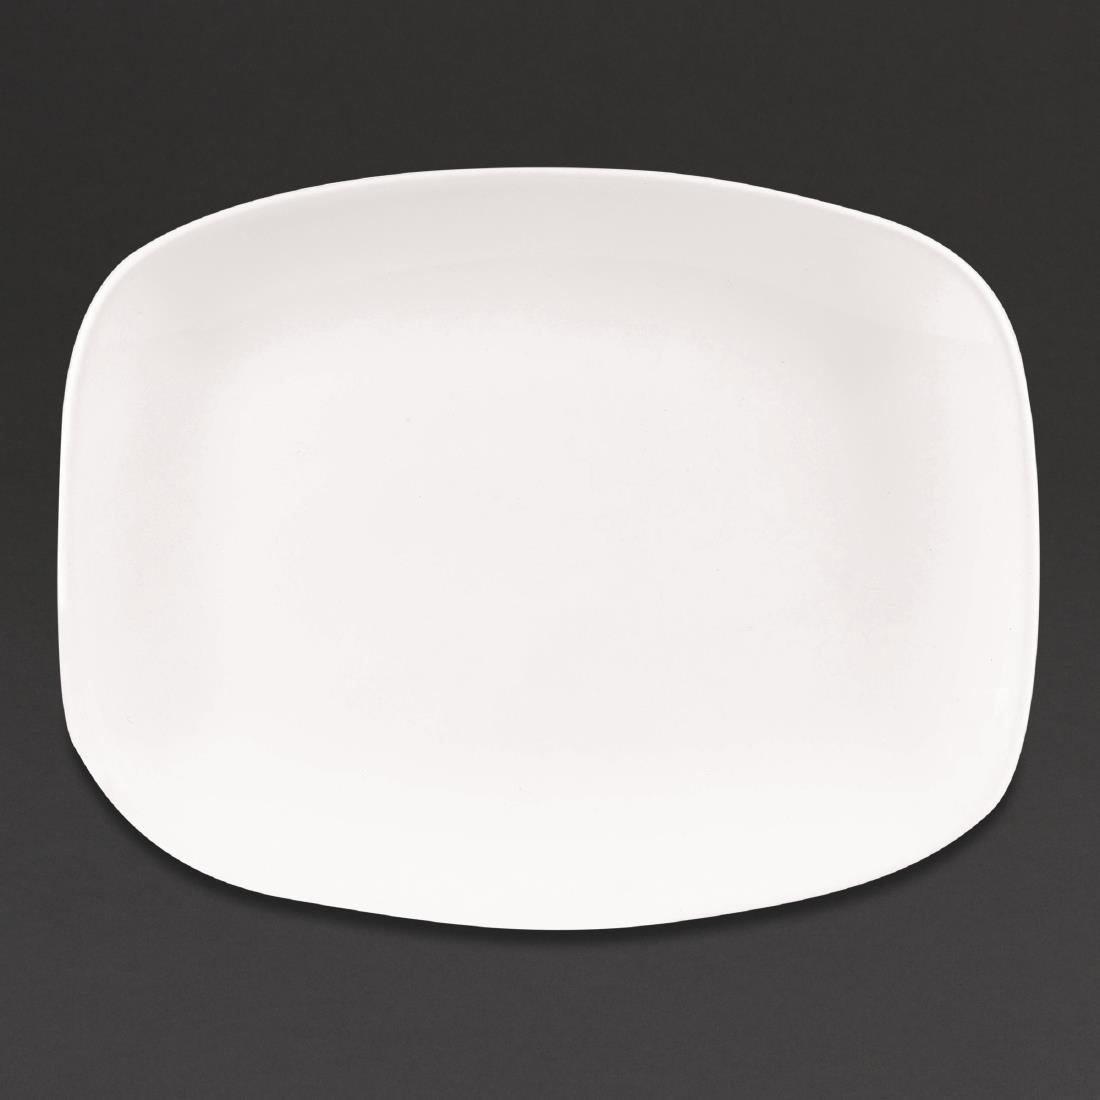 Churchill X Squared Oblong Plates White 202 x 261mm (Pack of 12) - DW341  - 1